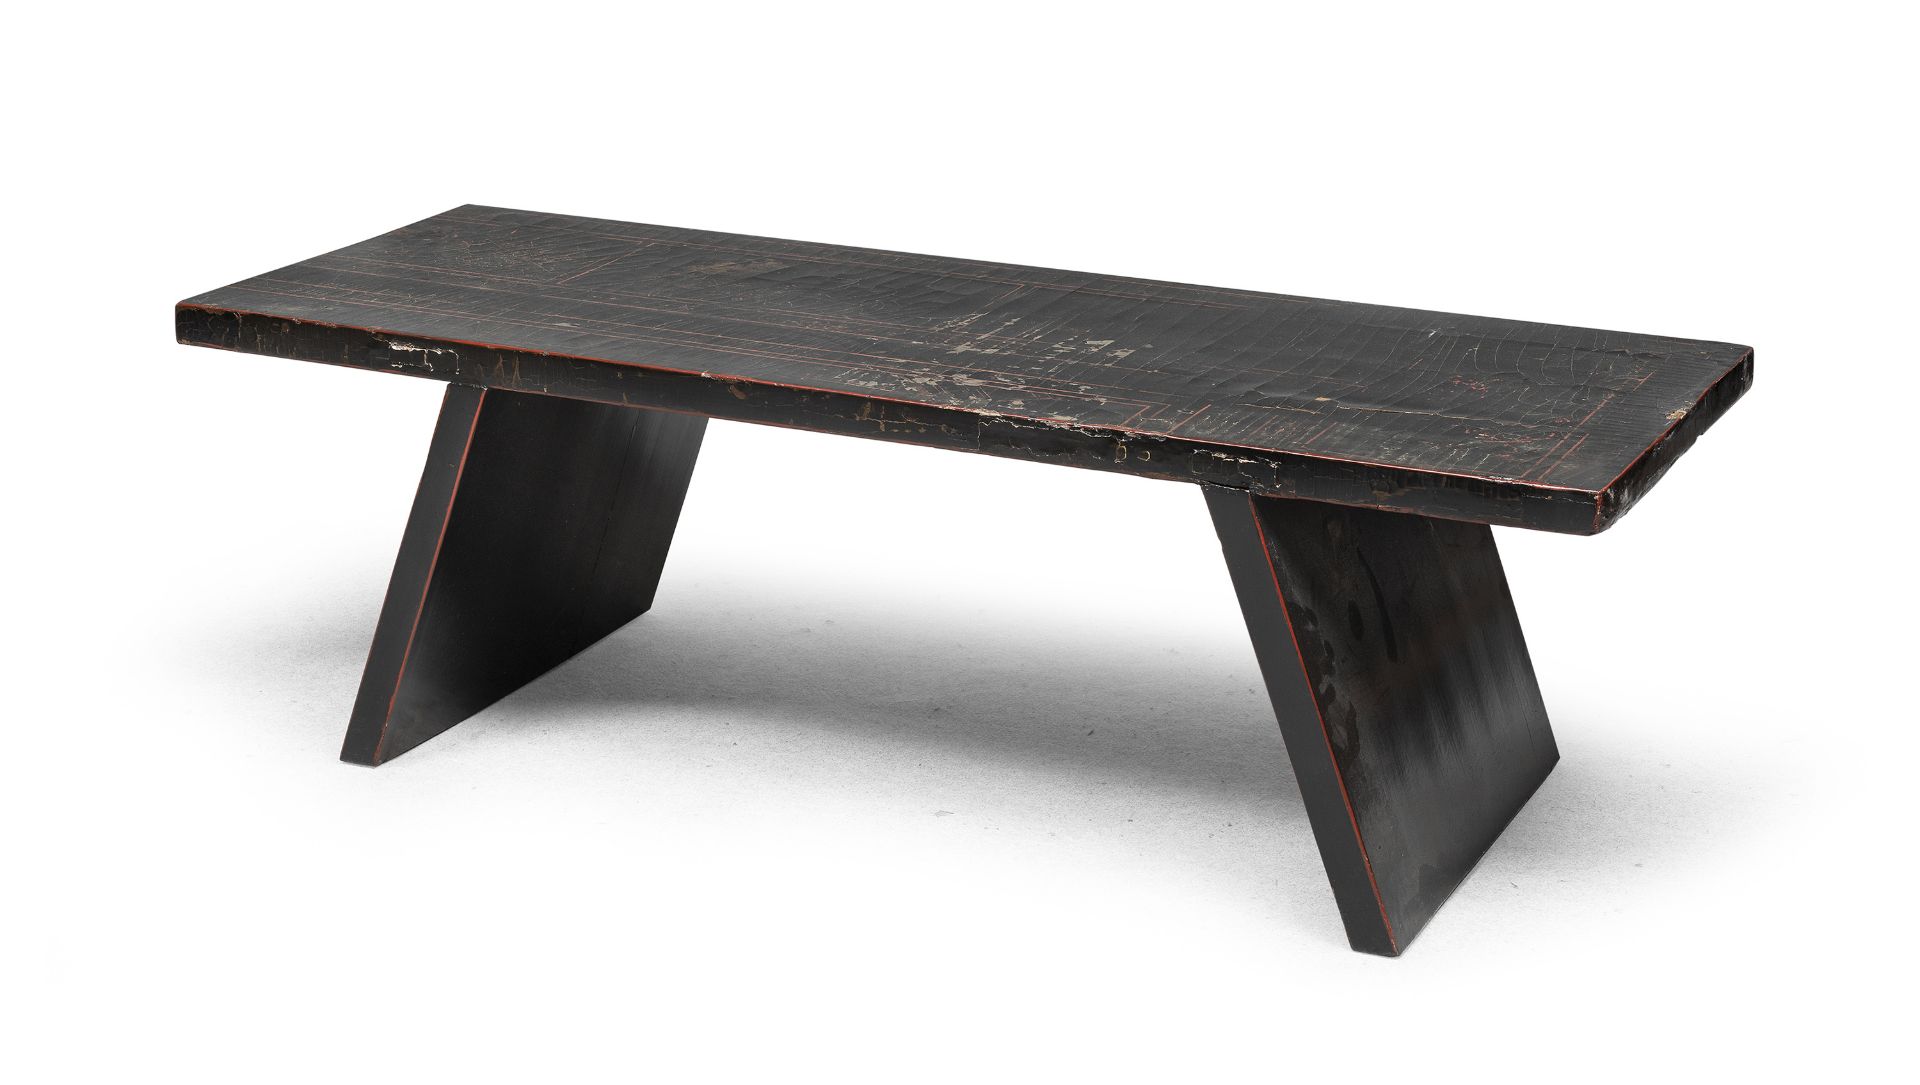 A CHINESE BLACK LAQUER WOOD TABLE WITH 19TH CENTURY TOP.